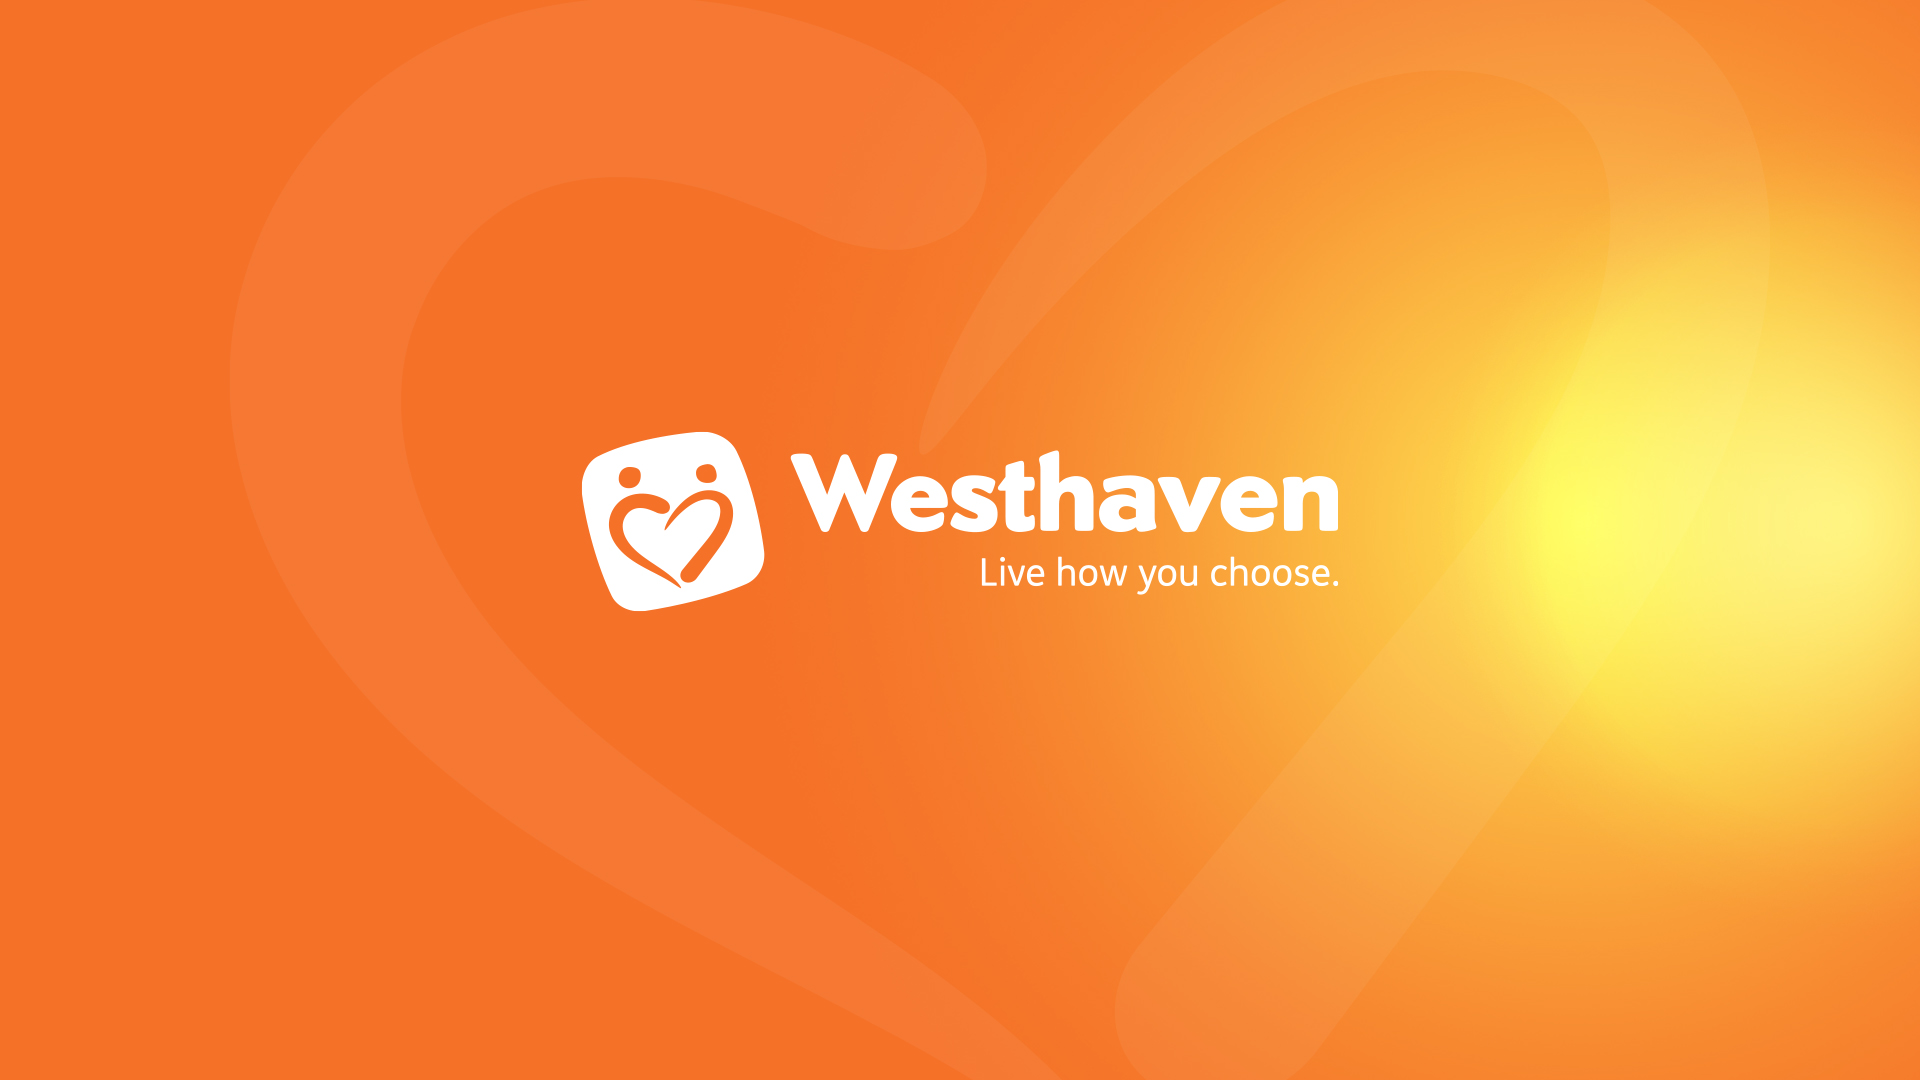 Westhaven is developing a Reconciliation Action Plan